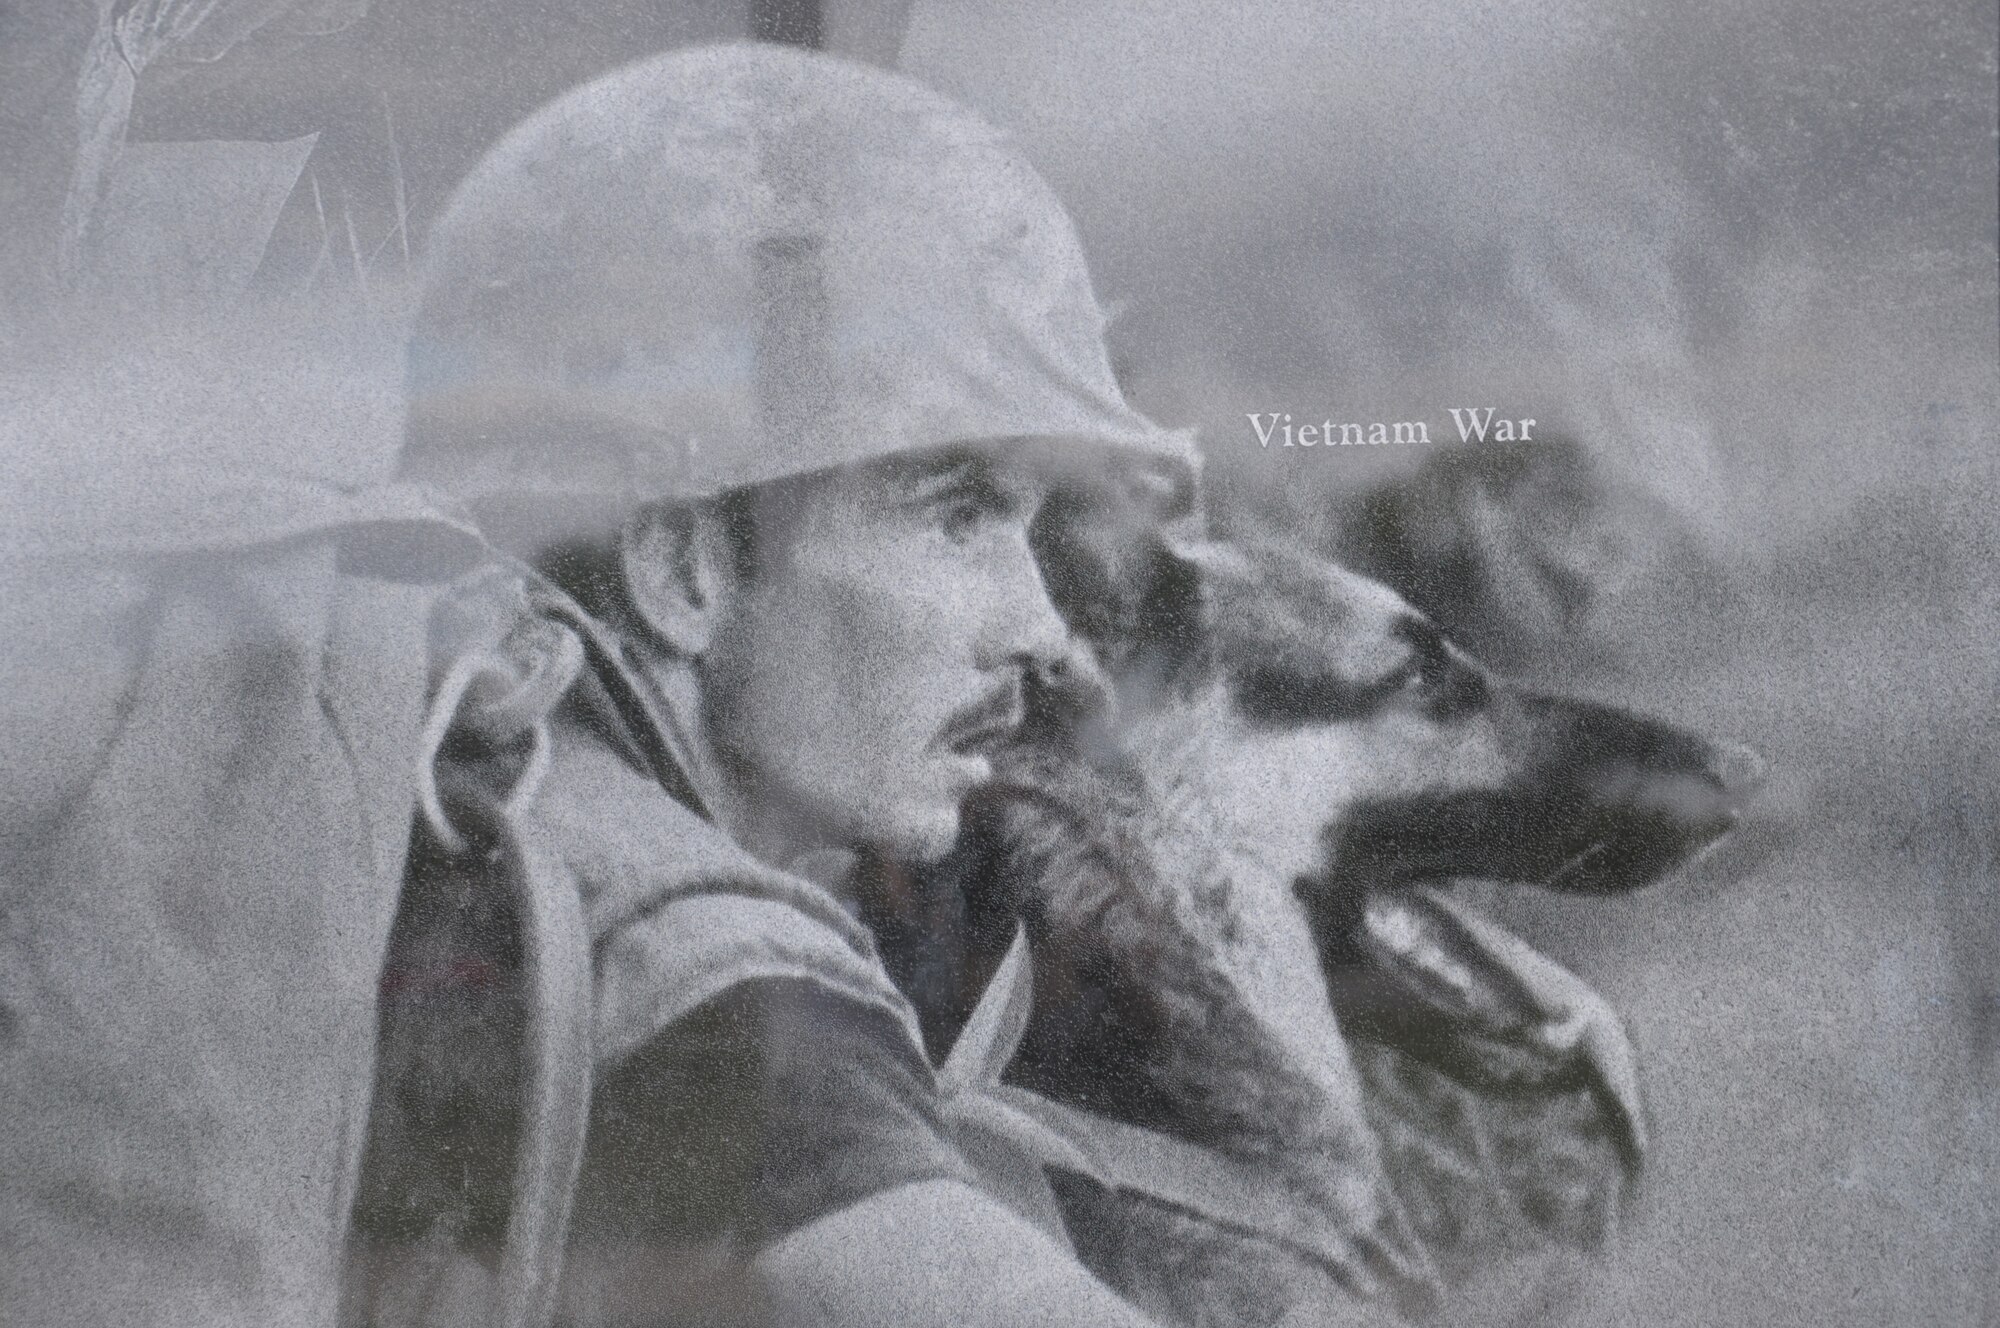 A image of a handler with his dog during the Vietnam War was part of collection that create a montage that is etched onto the face of the wall at the Military Working Dog Teams’ National Monument which was revealed Oct. 28, 2013 at Joint Base San Antonio-Lackland, Texas. There was also a statue of an Airman that was accompanied by four dog statues. (U.S. Air Force photo by Airman 1st Class Krystal M. Jeffers/Released)